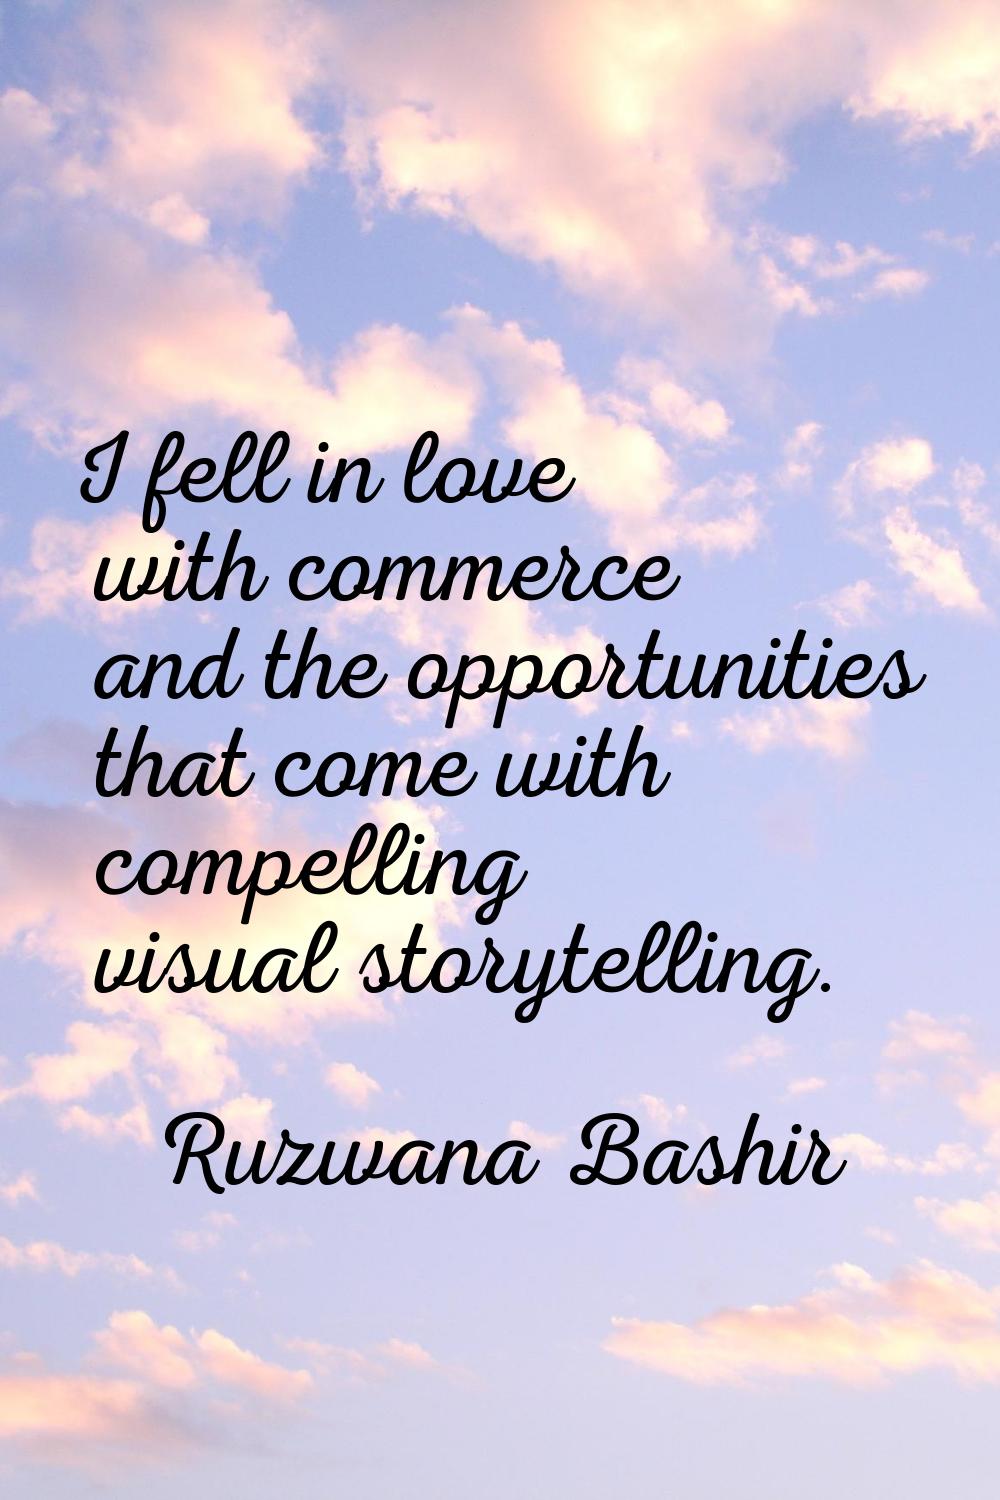 I fell in love with commerce and the opportunities that come with compelling visual storytelling.